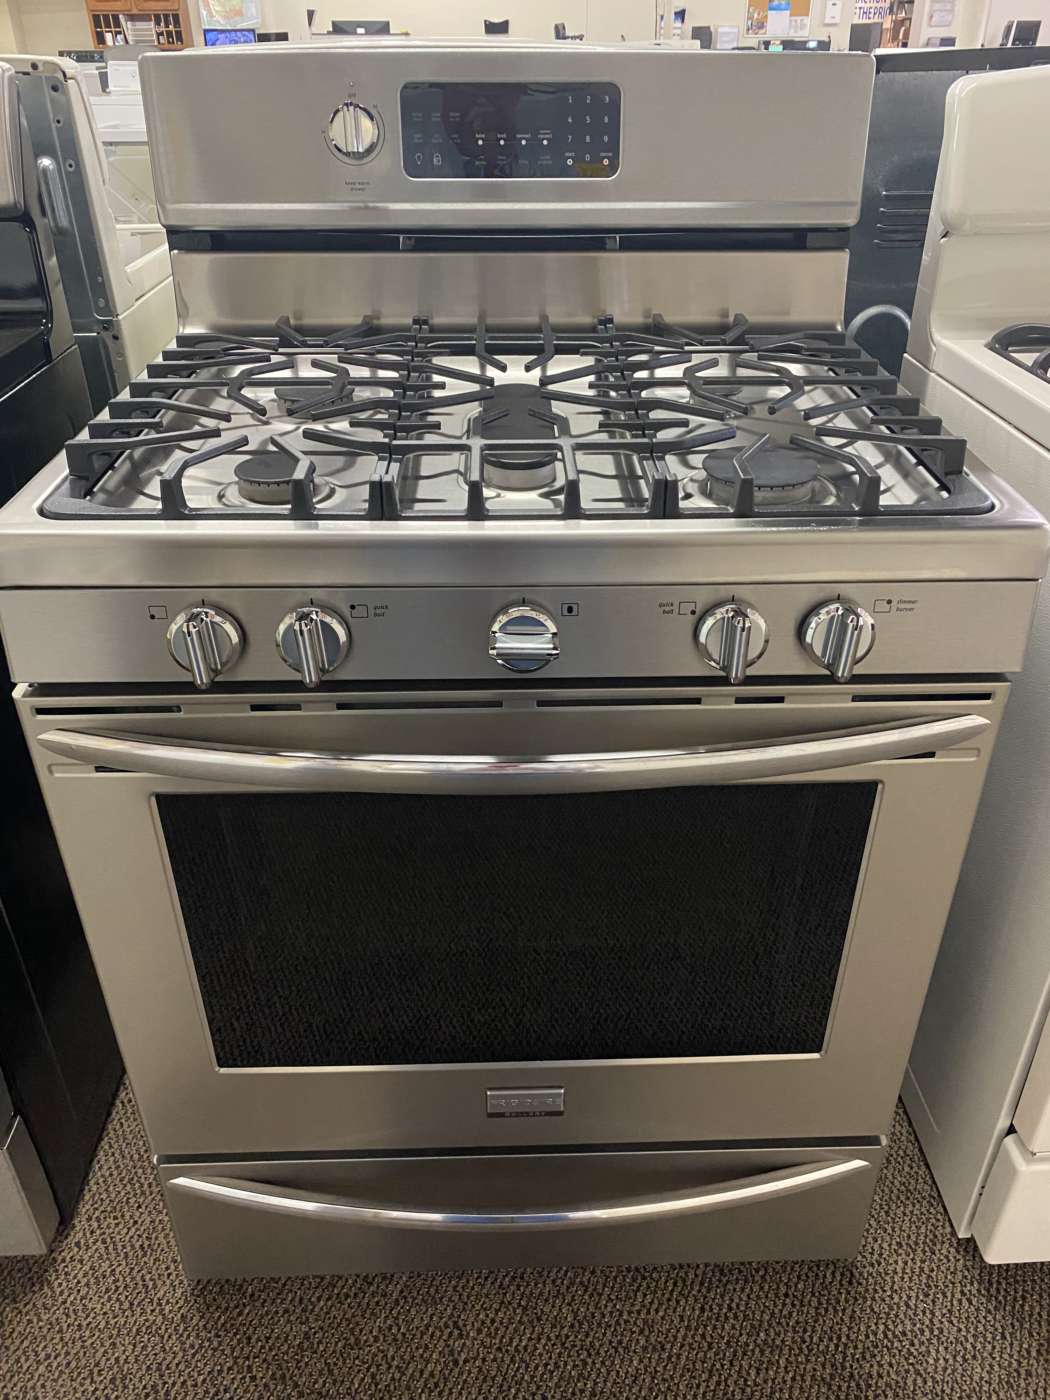 Reconditioned FRIGIDAIRE Self-Clean Convection-Oven GAS Range – Stainless